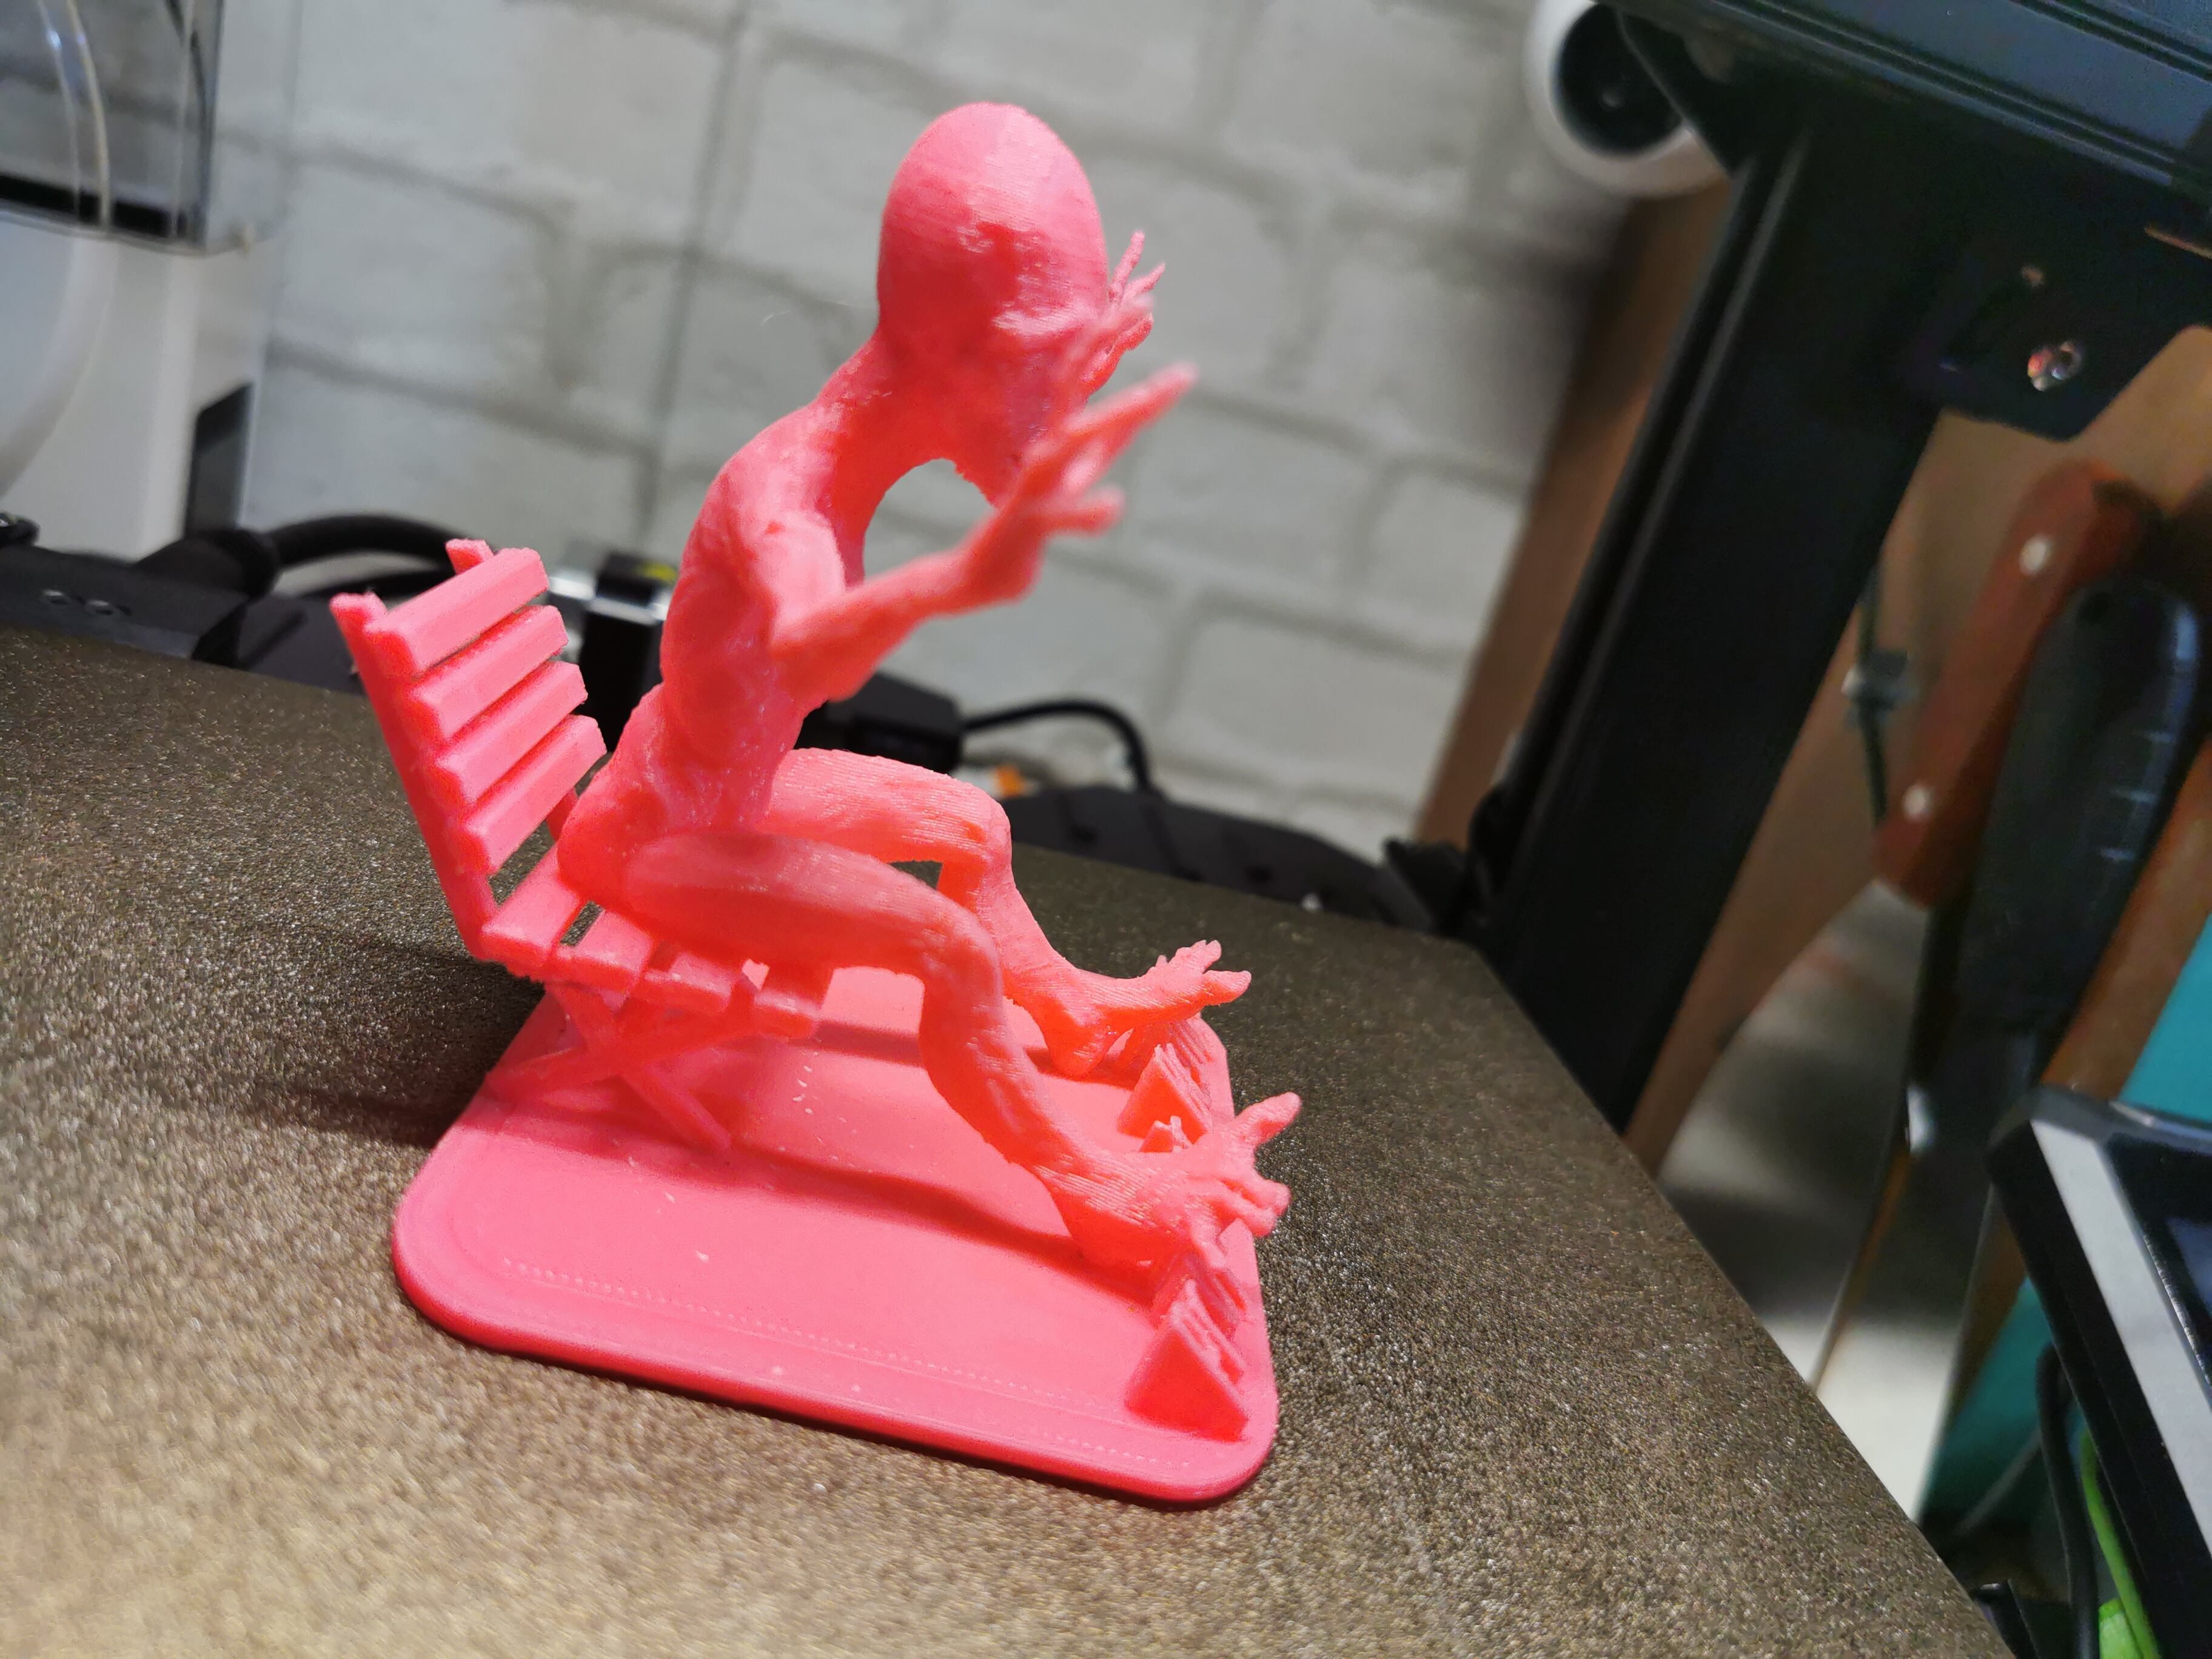 'Being' Phone Stand - Mini Alien Holding Phone.